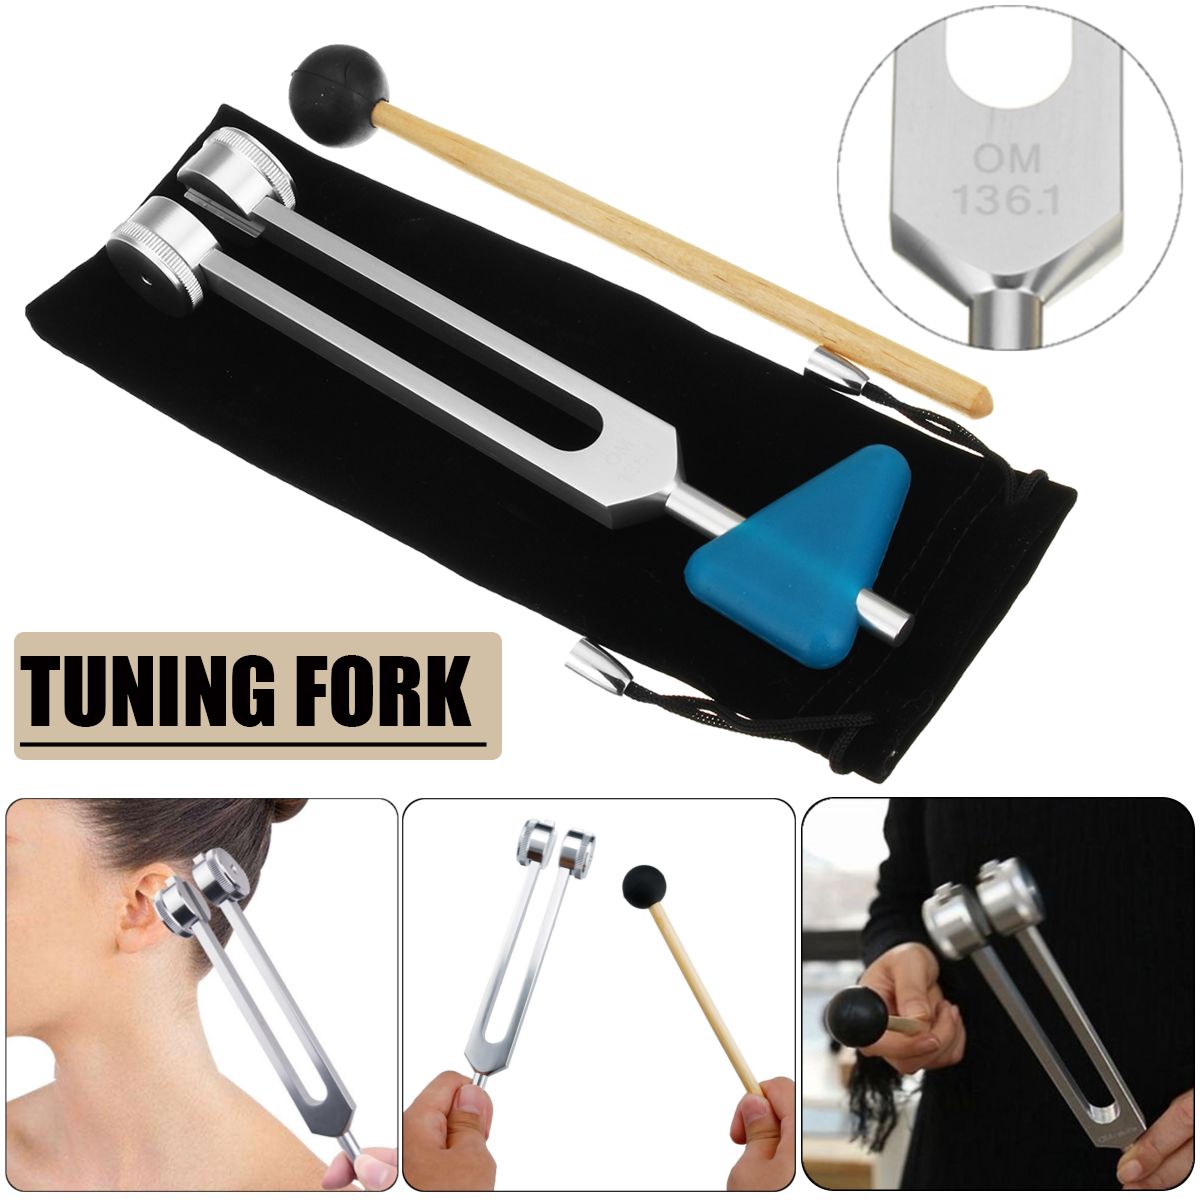 1361Hz-Yoga-Tuning-Fork-With-Belt-Cover-And-Hammer-Meditation-Nerve-Practice-Tools-1423438